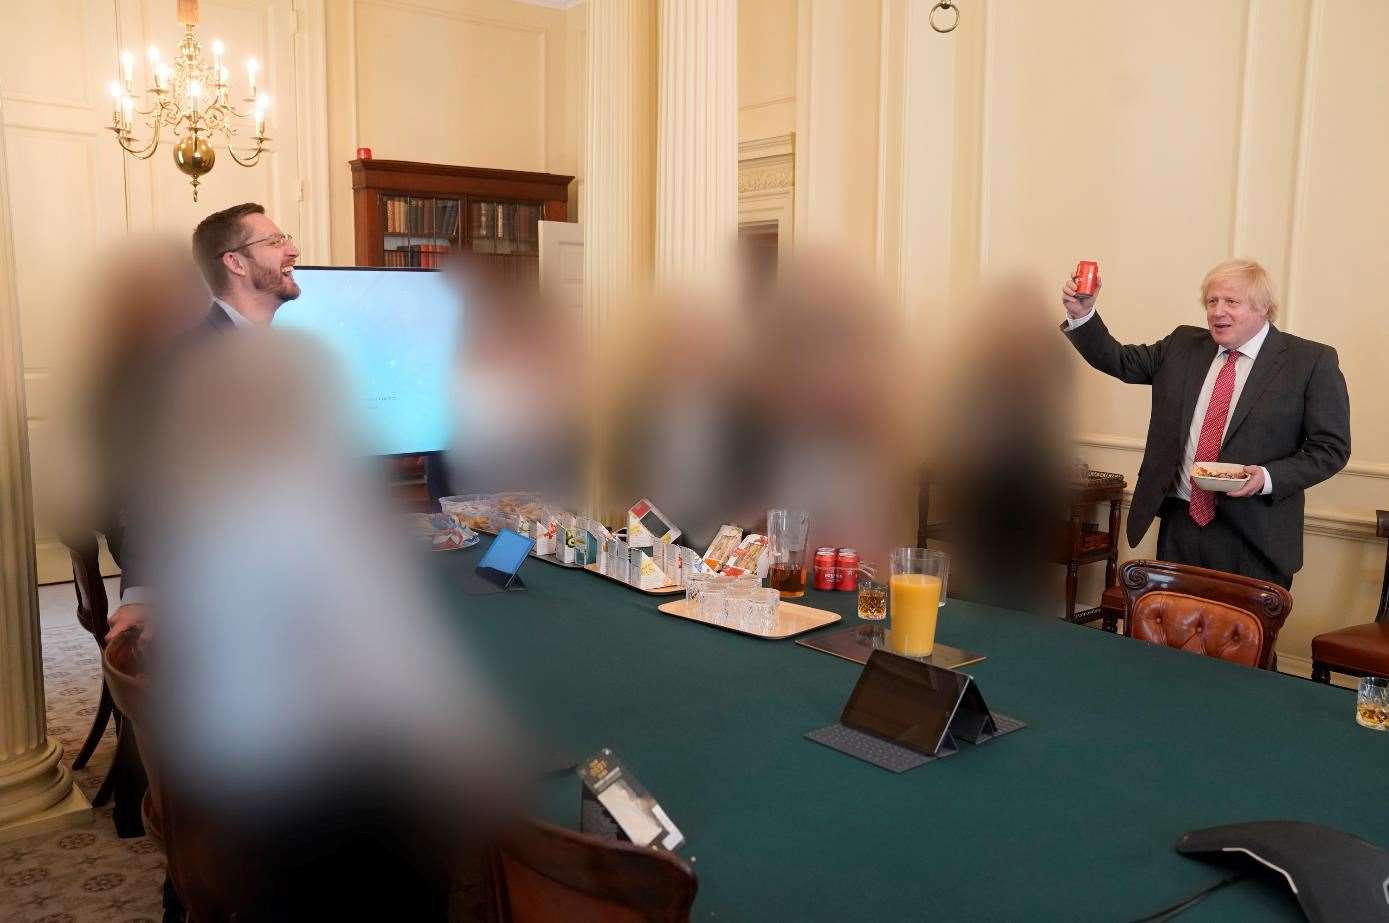 Prime Minister Boris Johnson at a gathering in the Cabinet Room in 10 Downing Street on his birthday in June 2020 (Cabinet Office/PA)